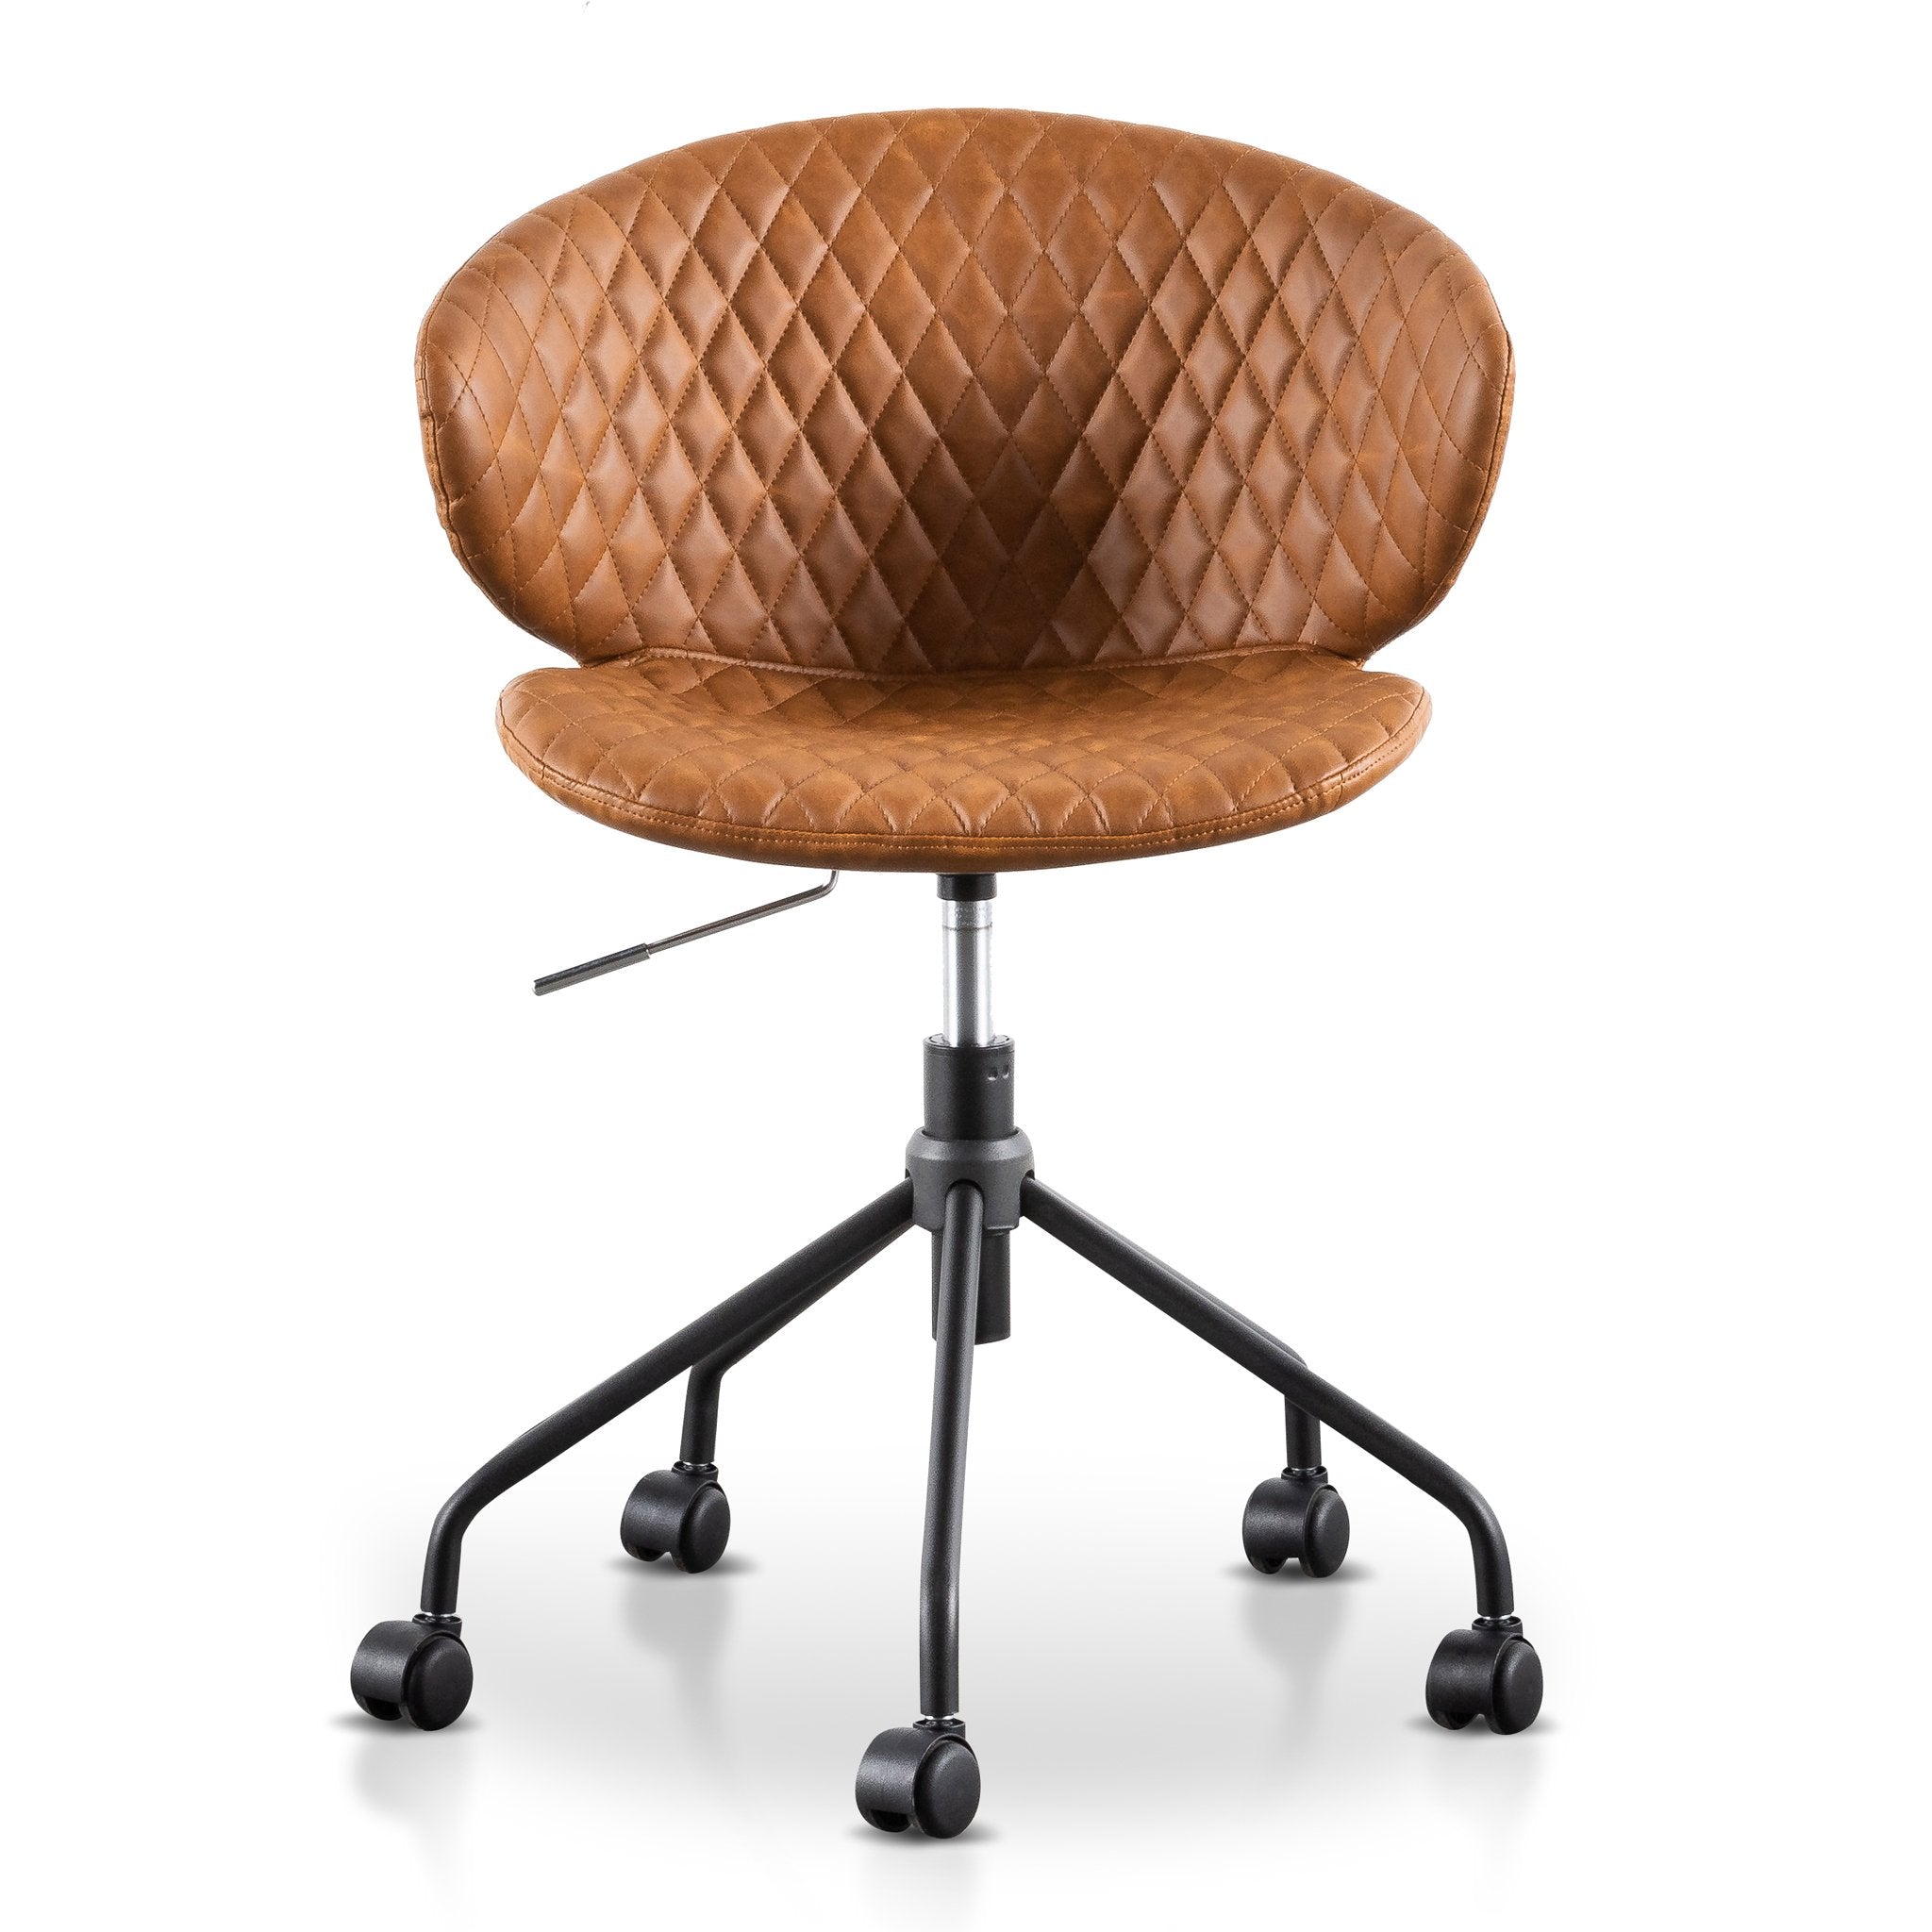 Halsten Office Chair - Tan with Black Base